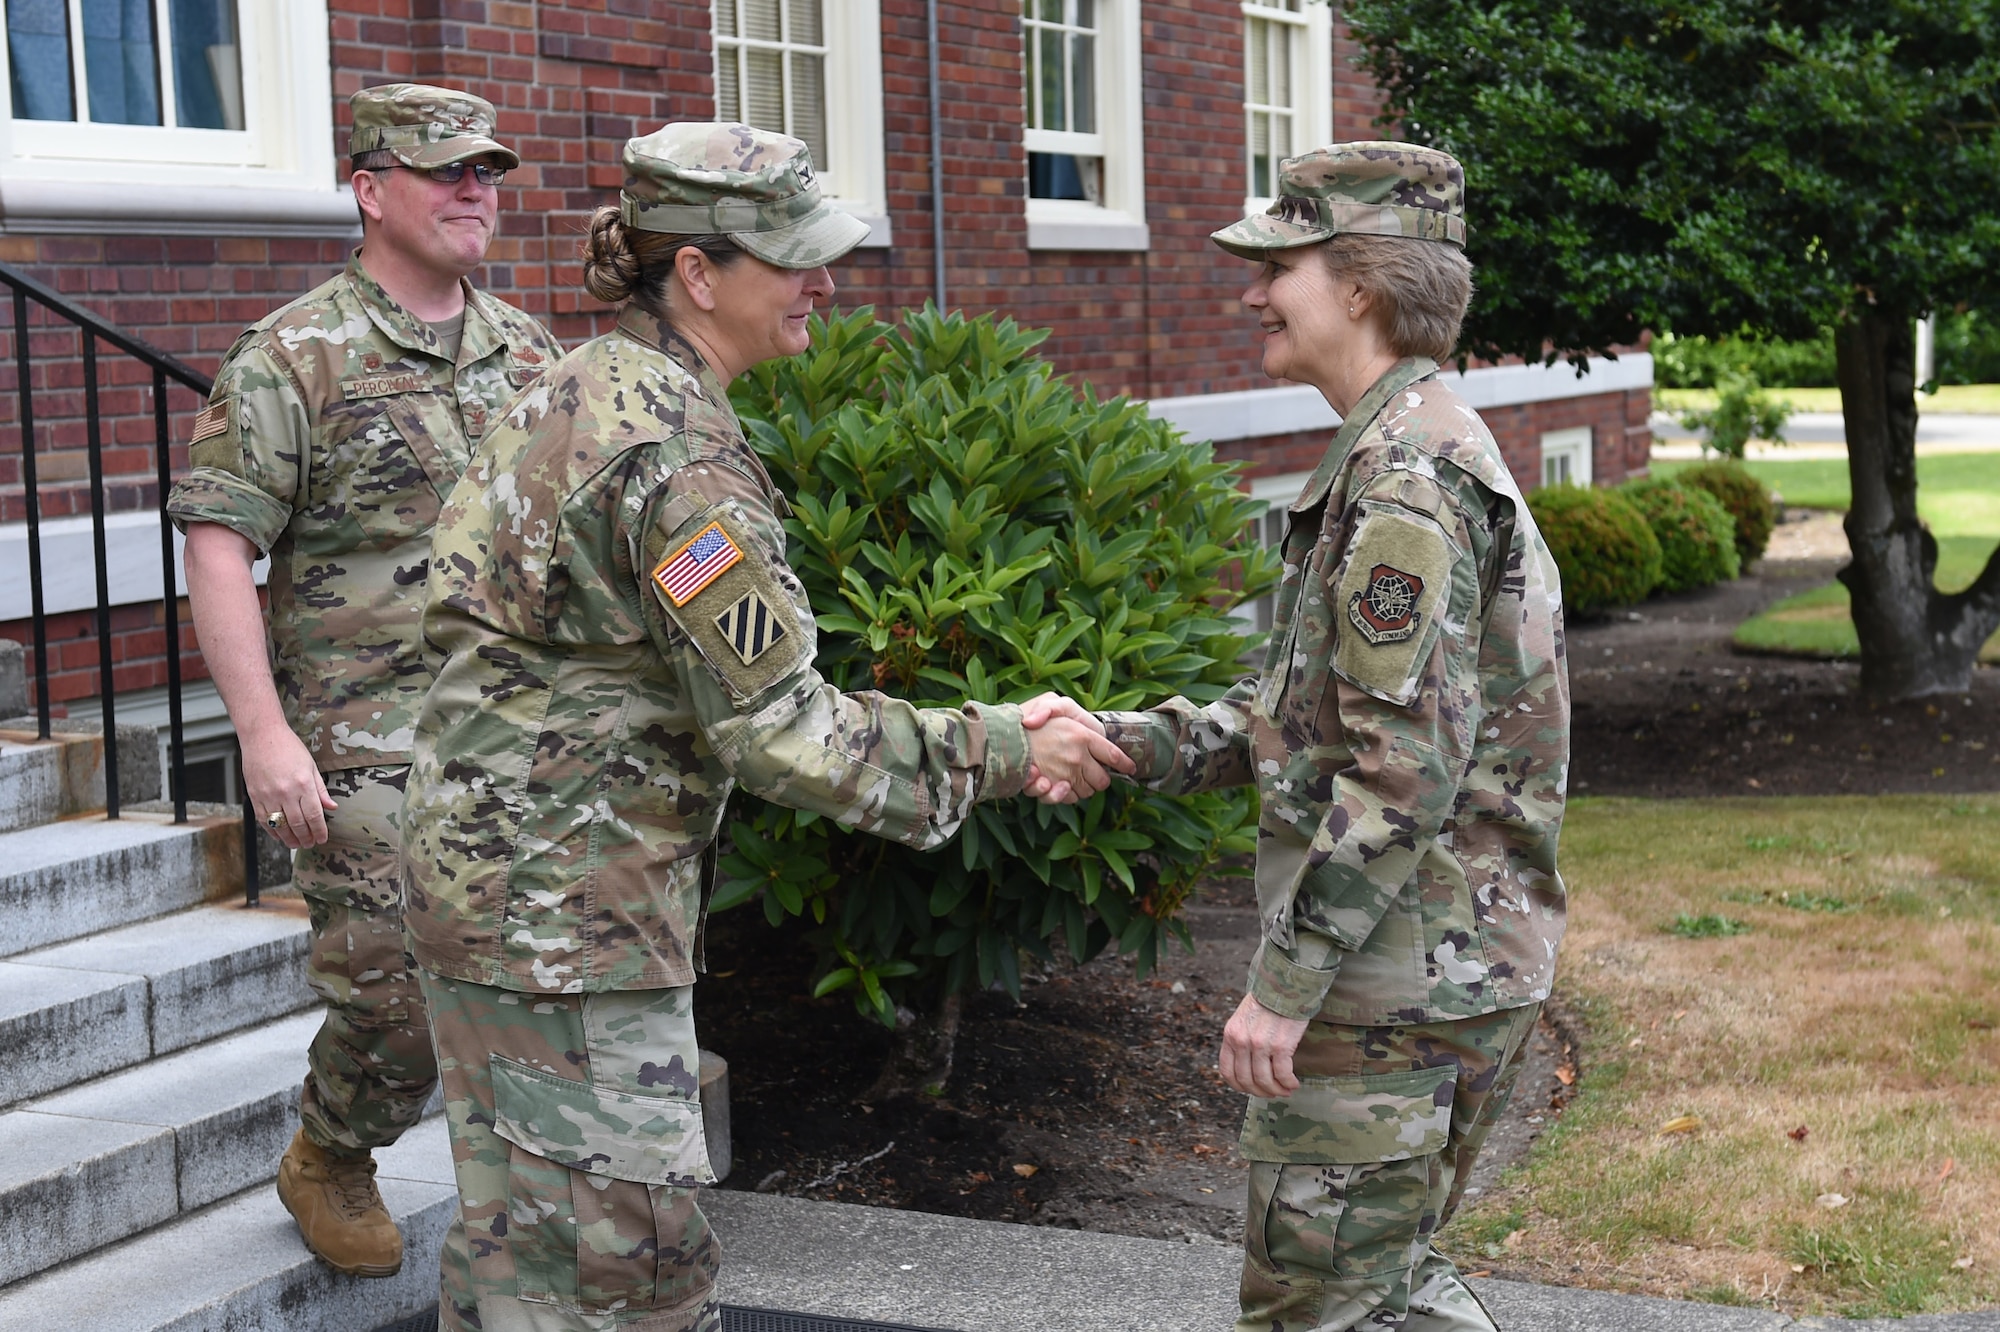 U.S. Army Colonel Nicole Lucas, Joint Base garrison commander, middle, and Col. Bill Percival, 627th Air Base Group and Joint Base deputy commander, far left, greet Gen. Maryanne Miller, Air Mobility Command commander, June 26, 2019 in front of Joint Base Headquarters at Joint Base Lewis-McChord, Wash.